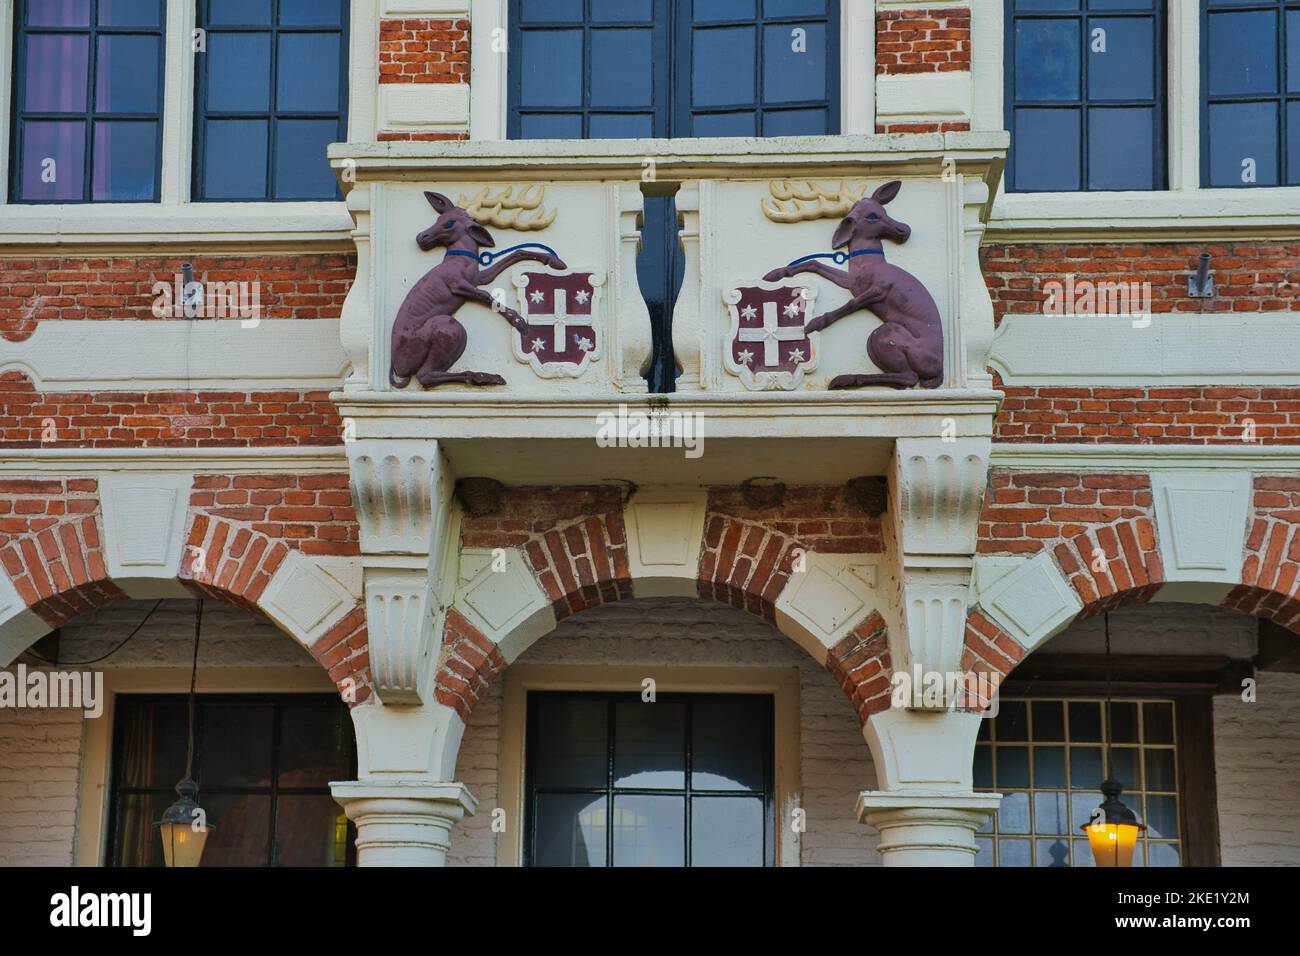 The town coat of arms, flanked by deer as shield holder, above the entrance to the 17th-century town hall of Vollenhove, the Netherlands. Stock Photo